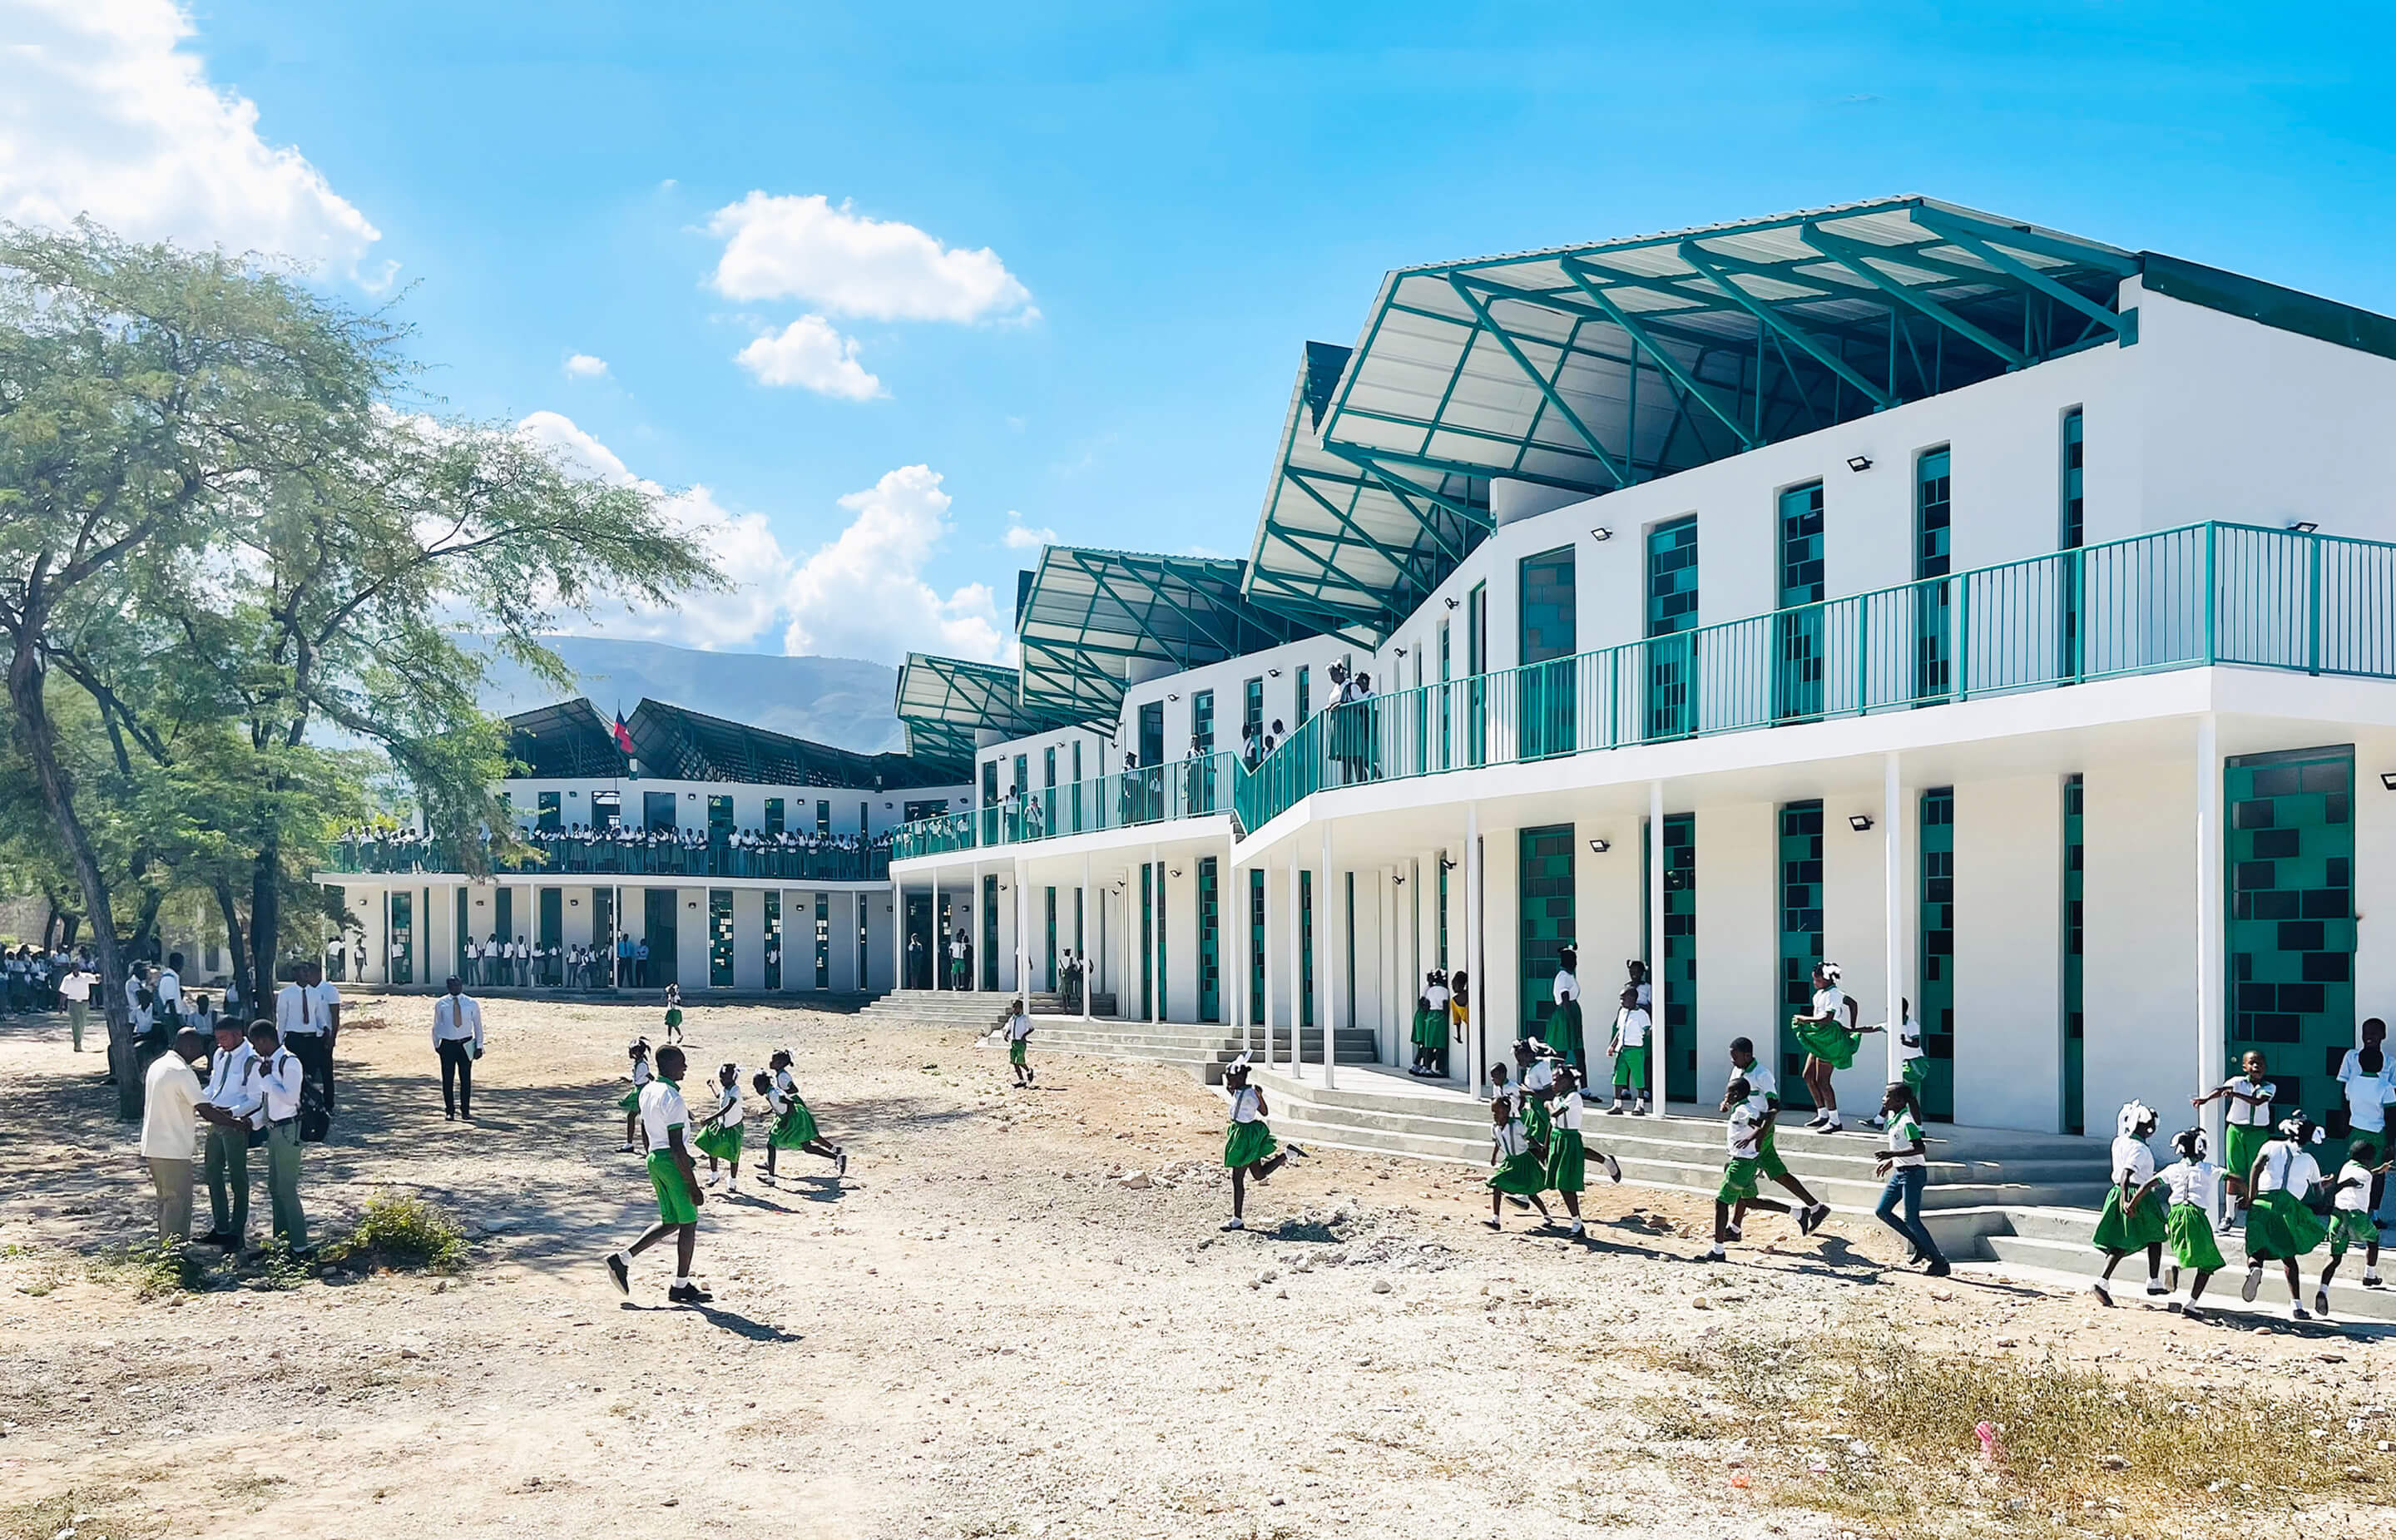 children in uniforms play outside of a rural school building